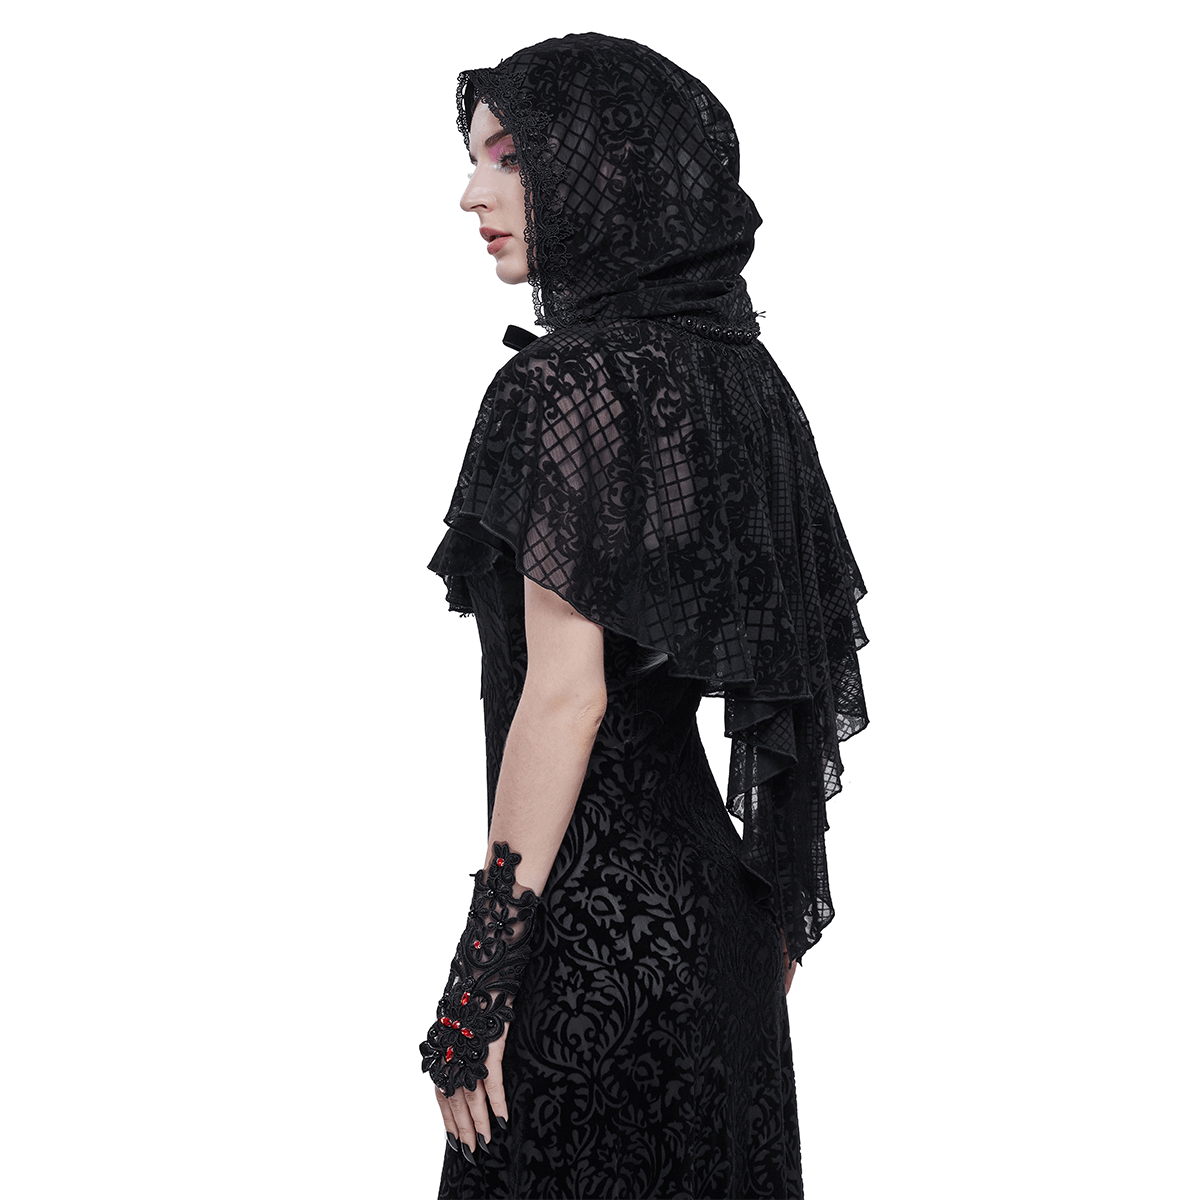 Gothic Short Hooded Cape with Velvet Tie / Women's Floral Mesh Cape - HARD'N'HEAVY